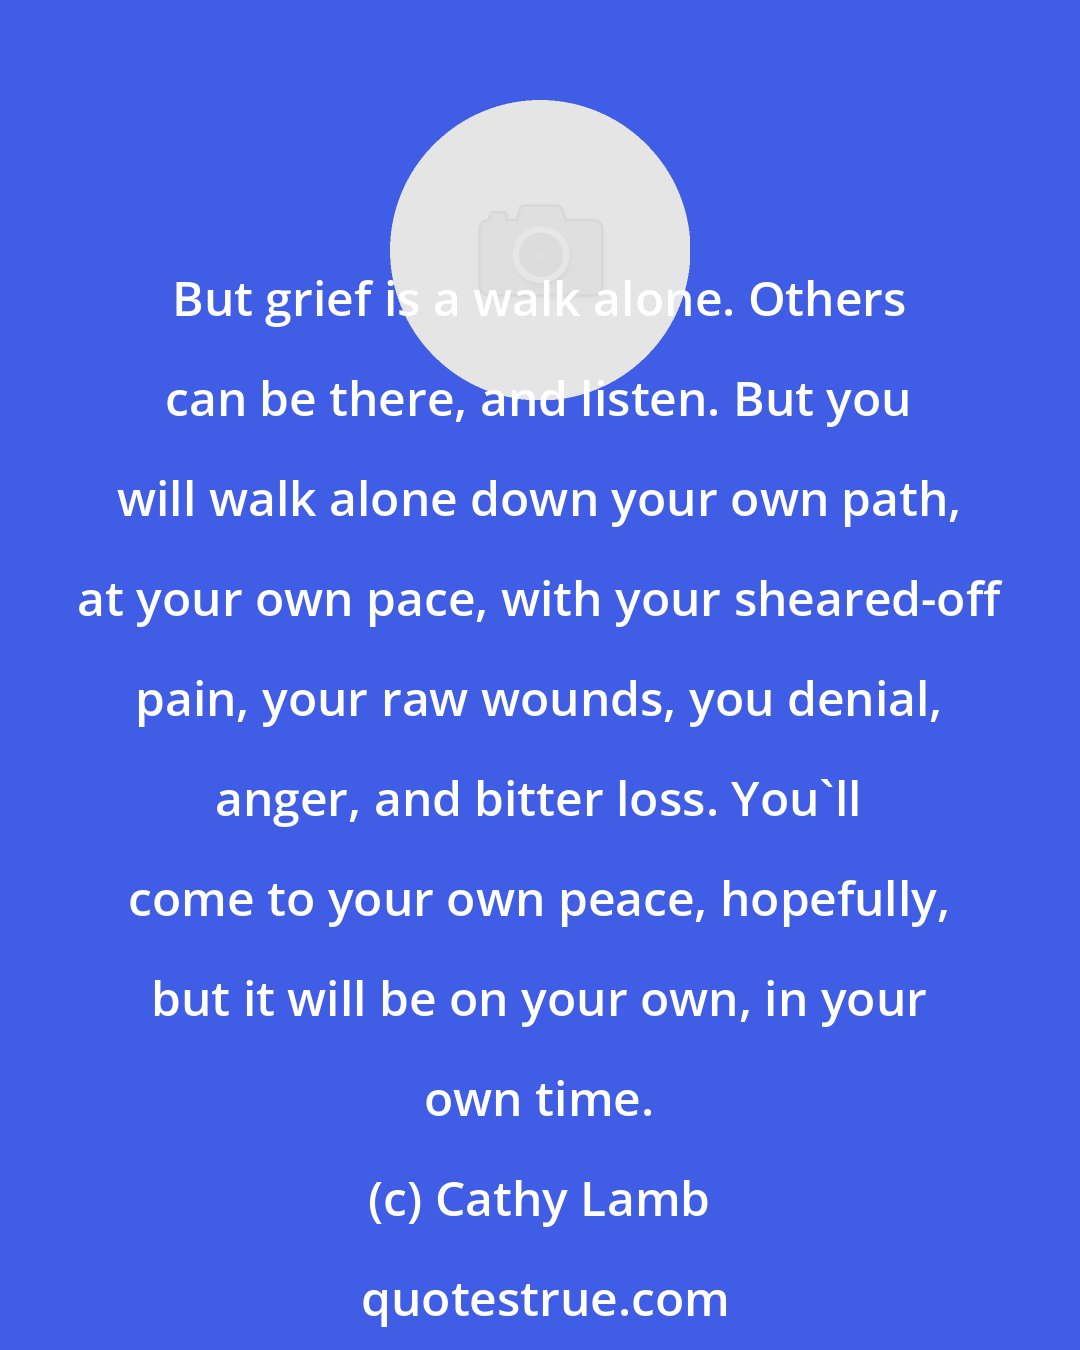 Cathy Lamb: But grief is a walk alone. Others can be there, and listen. But you will walk alone down your own path, at your own pace, with your sheared-off pain, your raw wounds, you denial, anger, and bitter loss. You'll come to your own peace, hopefully, but it will be on your own, in your own time.